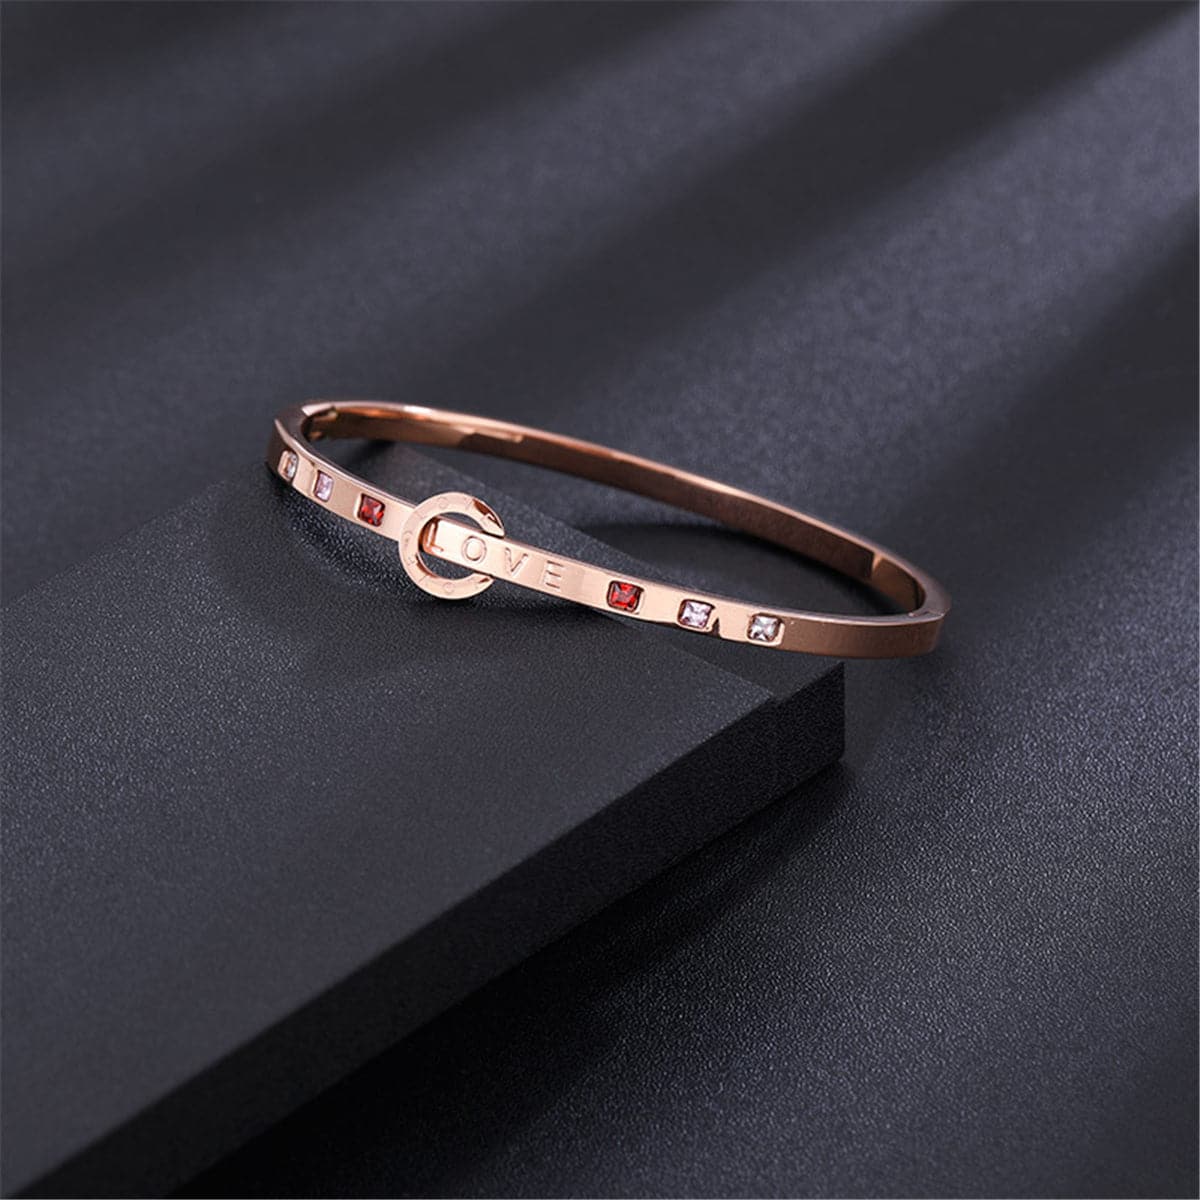 Cubic Zirconia & 18K Rose Gold-Plated 'Love' Bangle